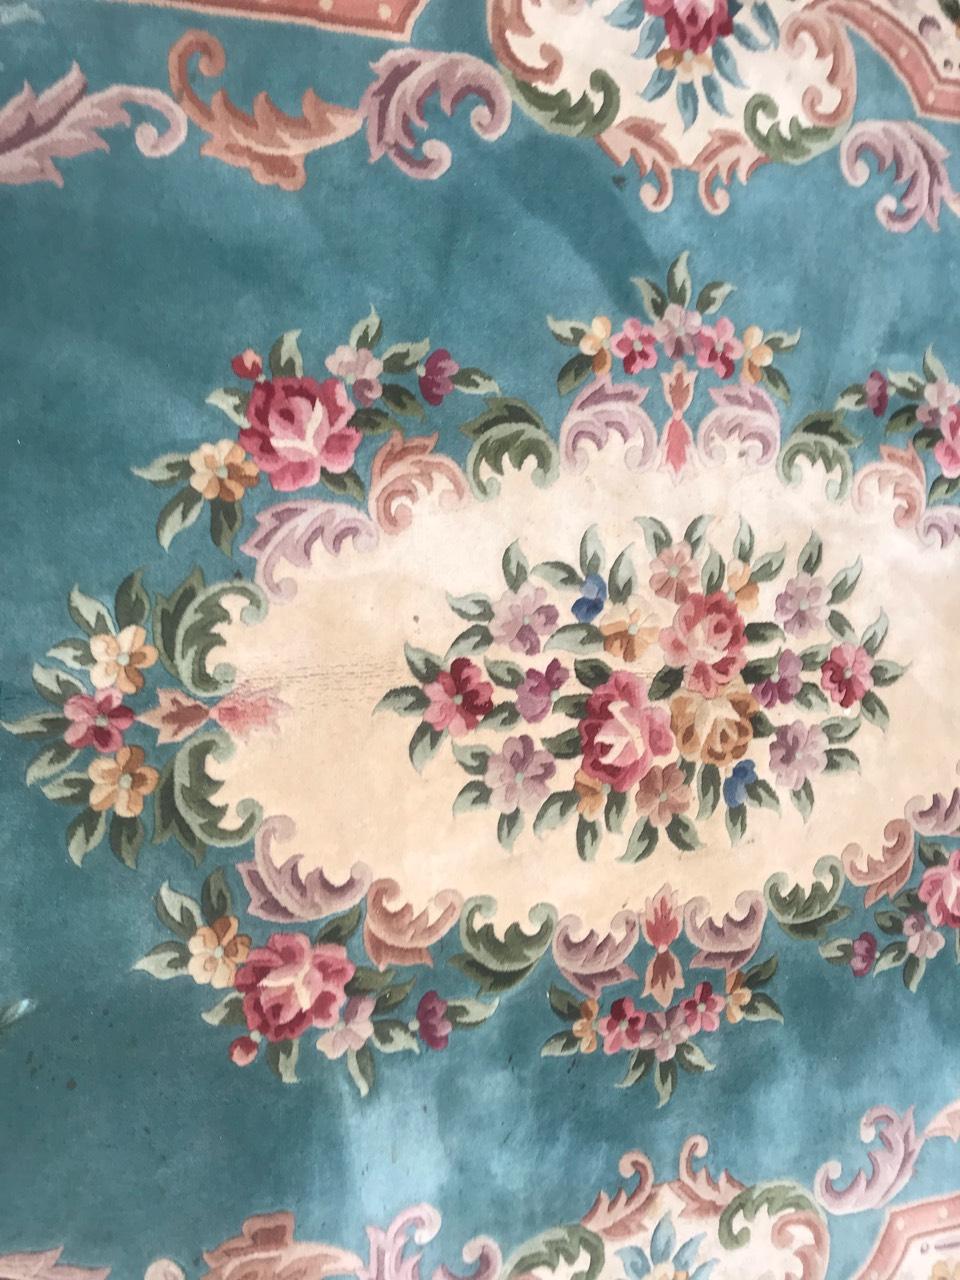 Exquisite late 20th-century Chinese rug featuring an Aubusson or Savonnerie design. This hand-knotted masterpiece showcases a vibrant color palette including blue, pink, and green. The wool velvet on a cotton foundation enhances its luxurious feel.